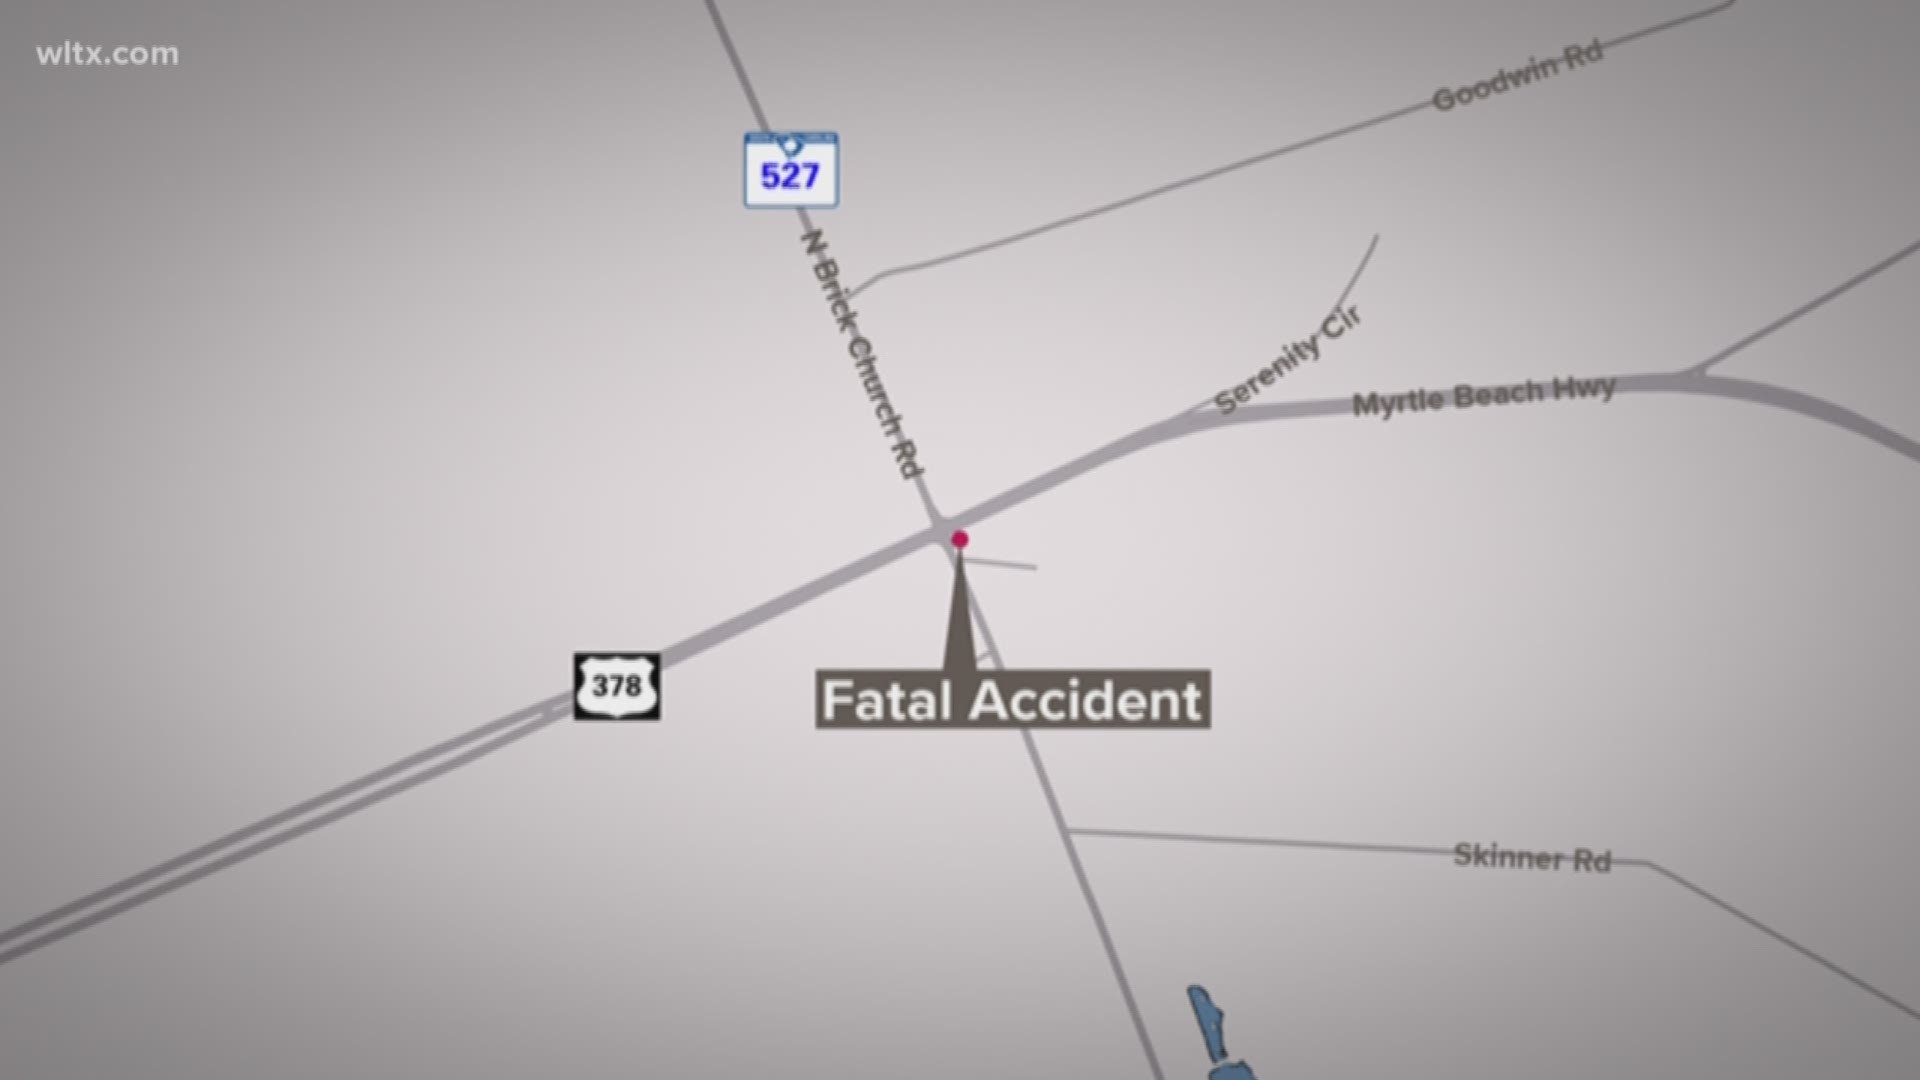 According to the Sumter County coroner, Clayton Moore, 24, was killed when the motorcycle he was riding was hit by a semi on HWY 527.